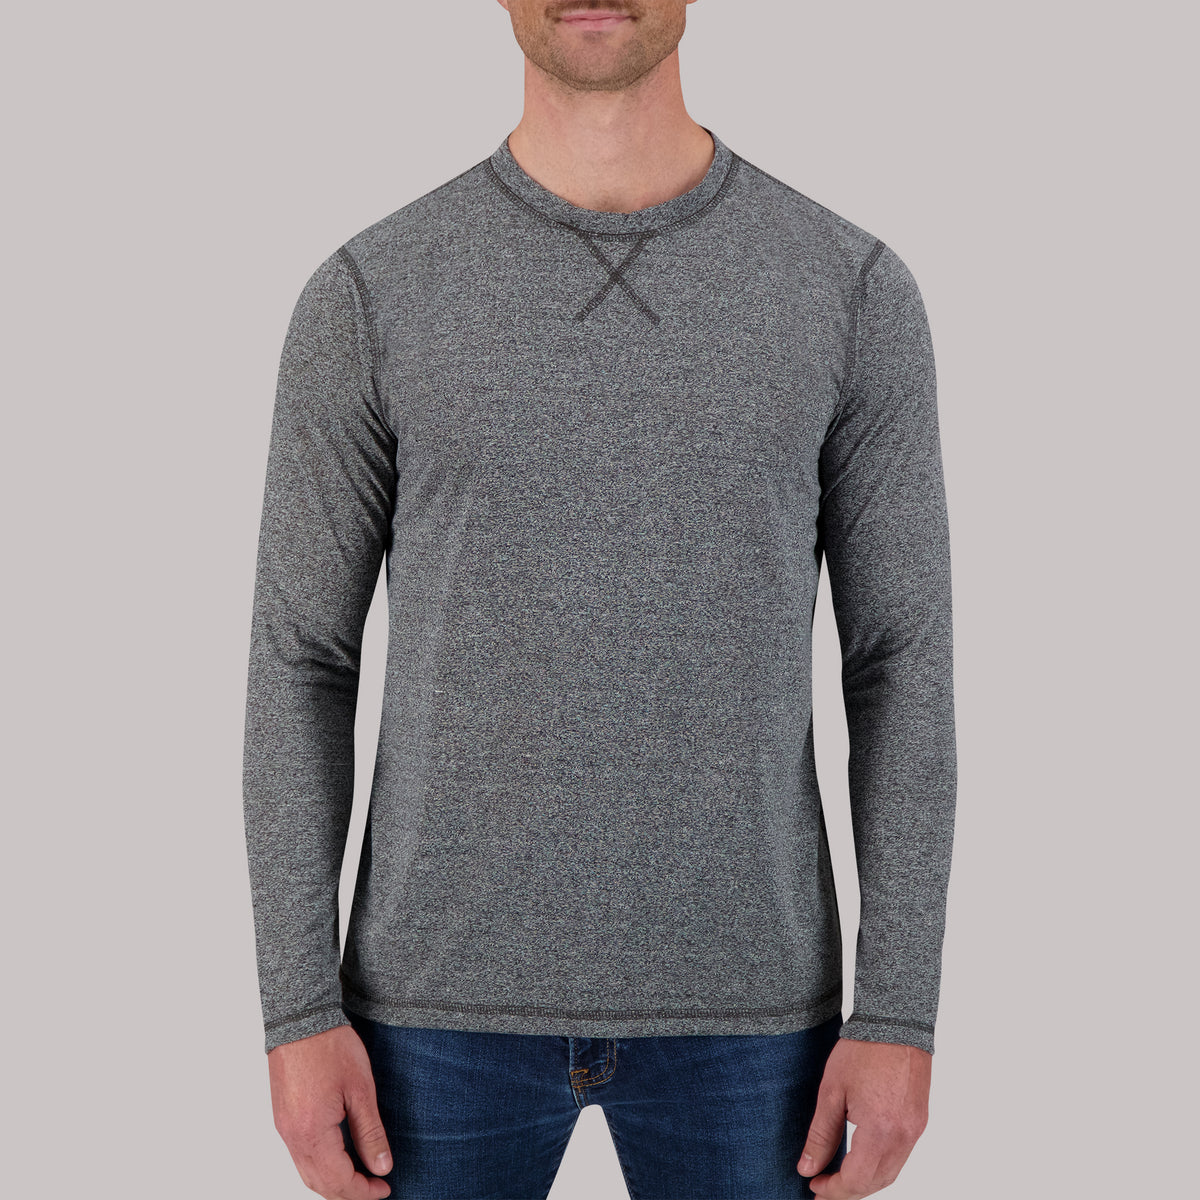 Long Sleeve Cotton/Poly Crew Neck Grindal Knit in Charcoal